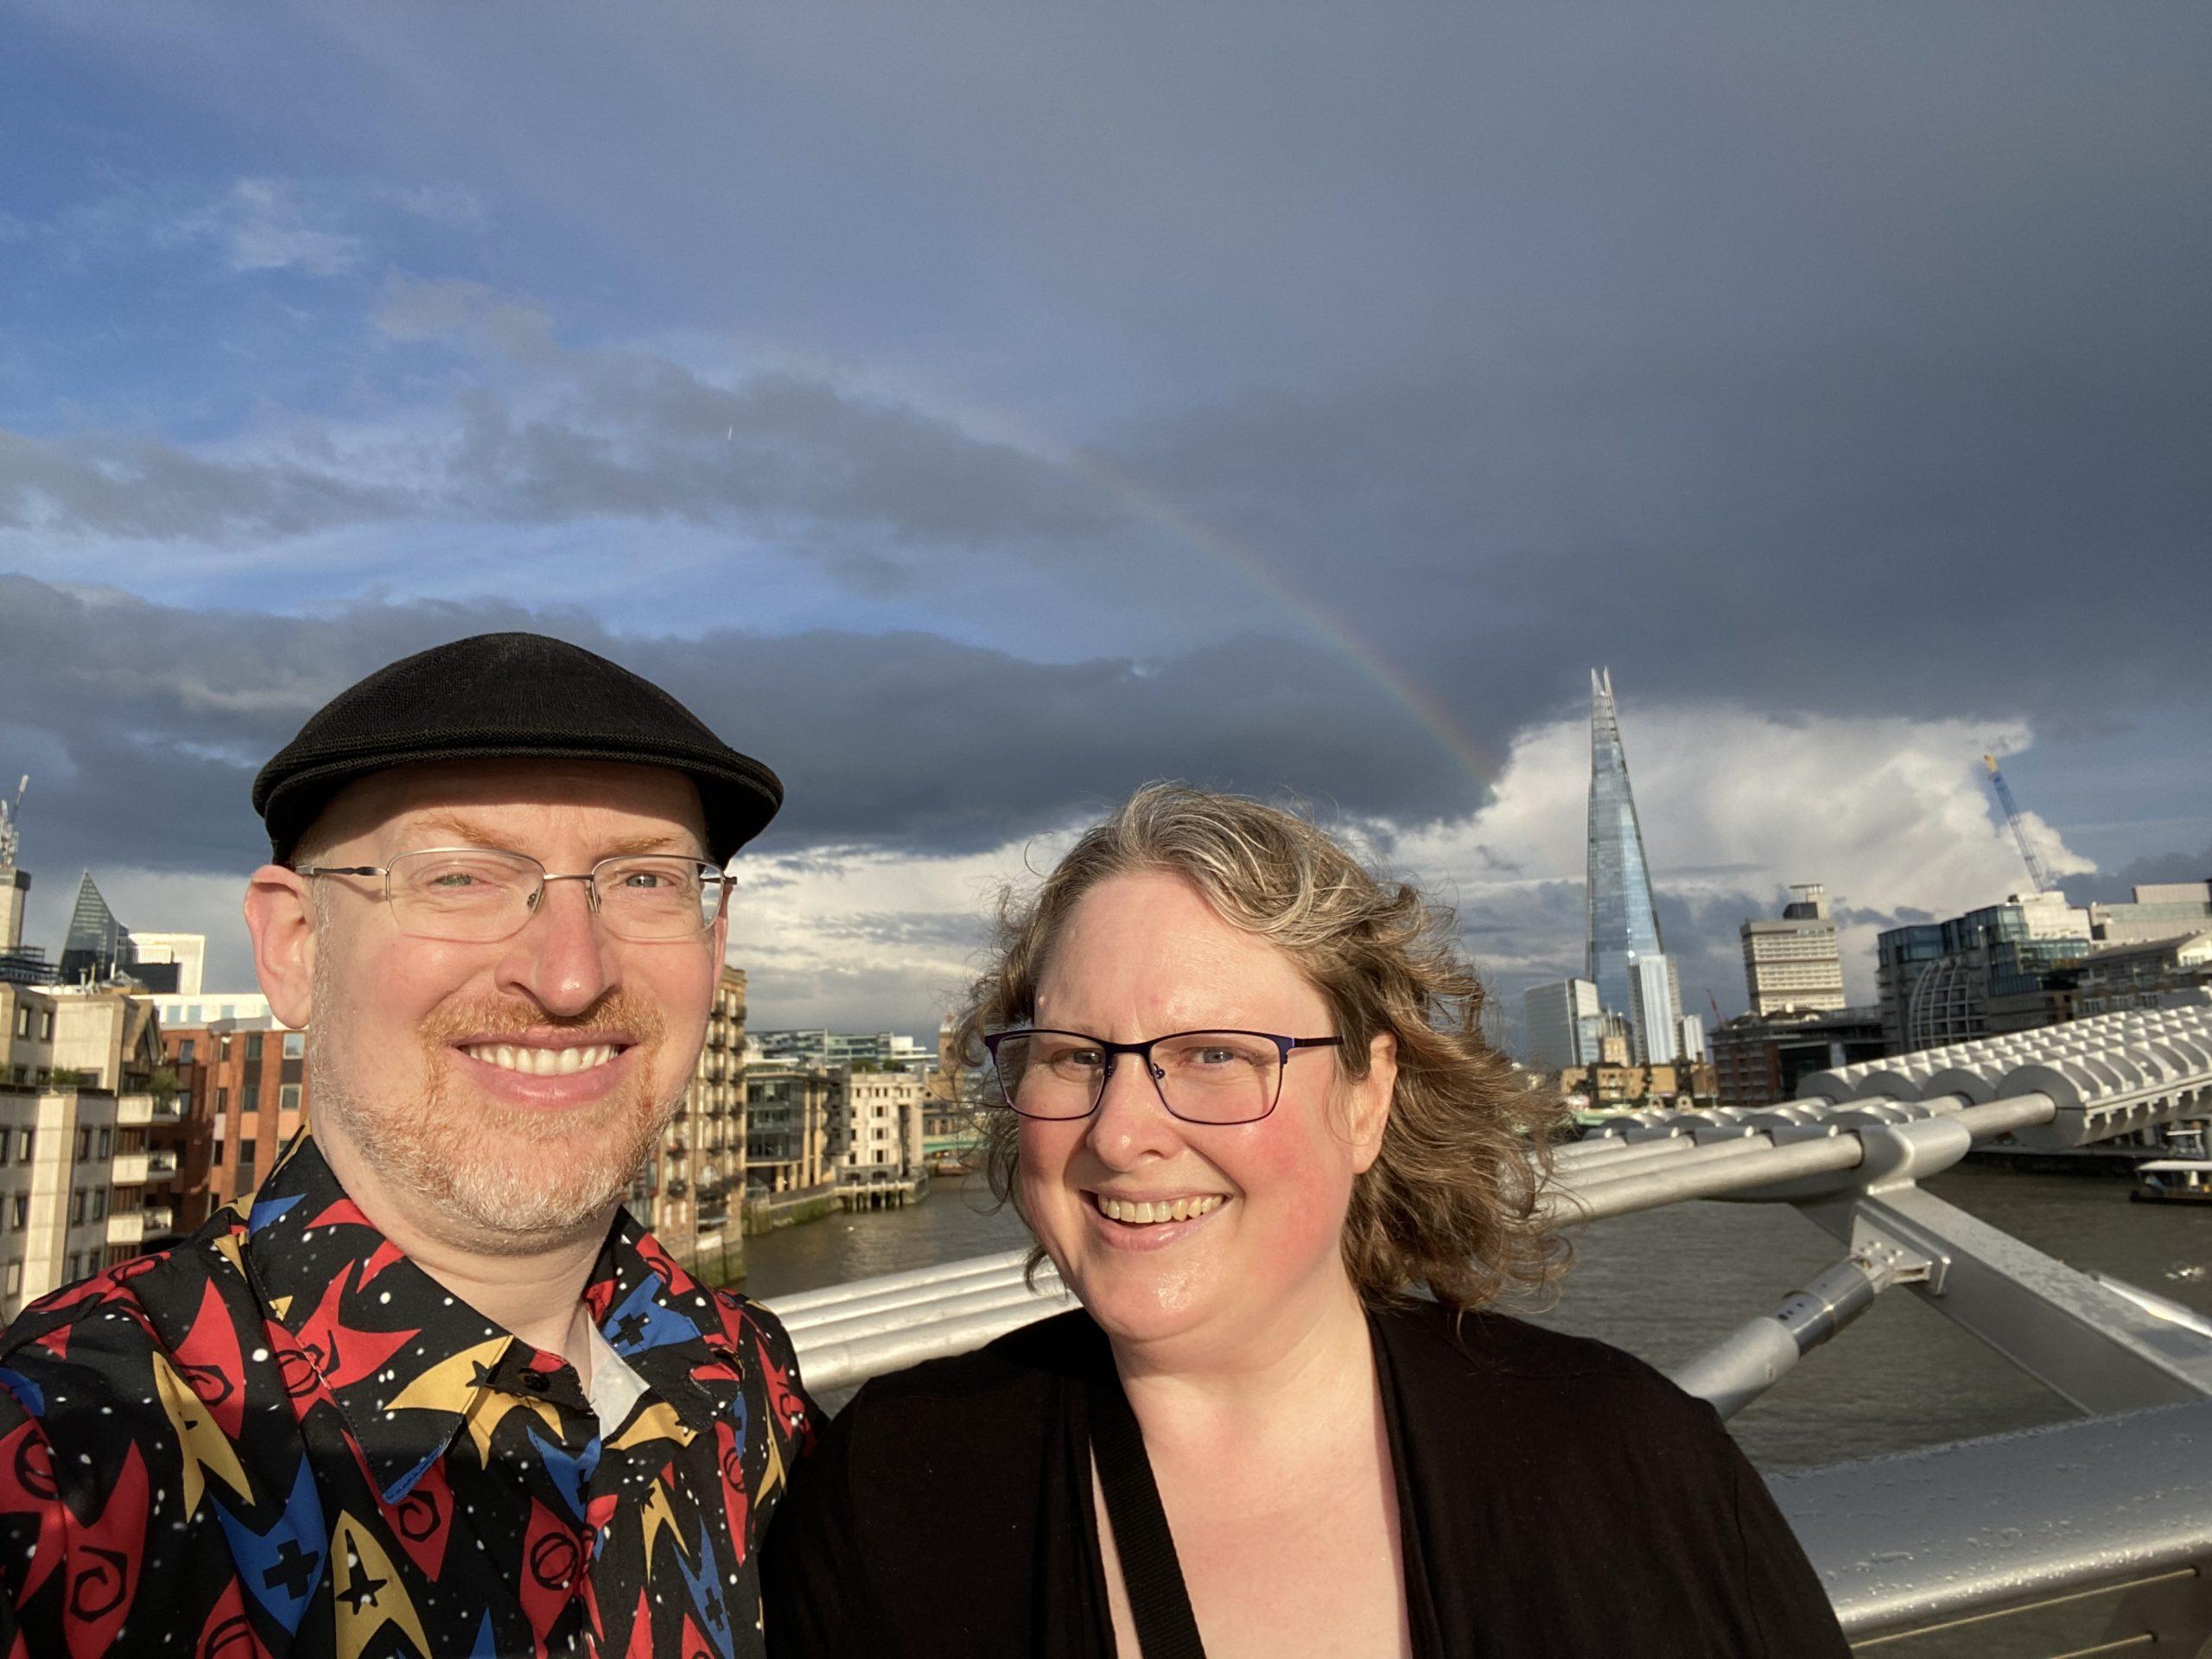 My wife and I, both kind of squinty, on the Millennium Bridge with a rainbow arcing over London visible behind us.